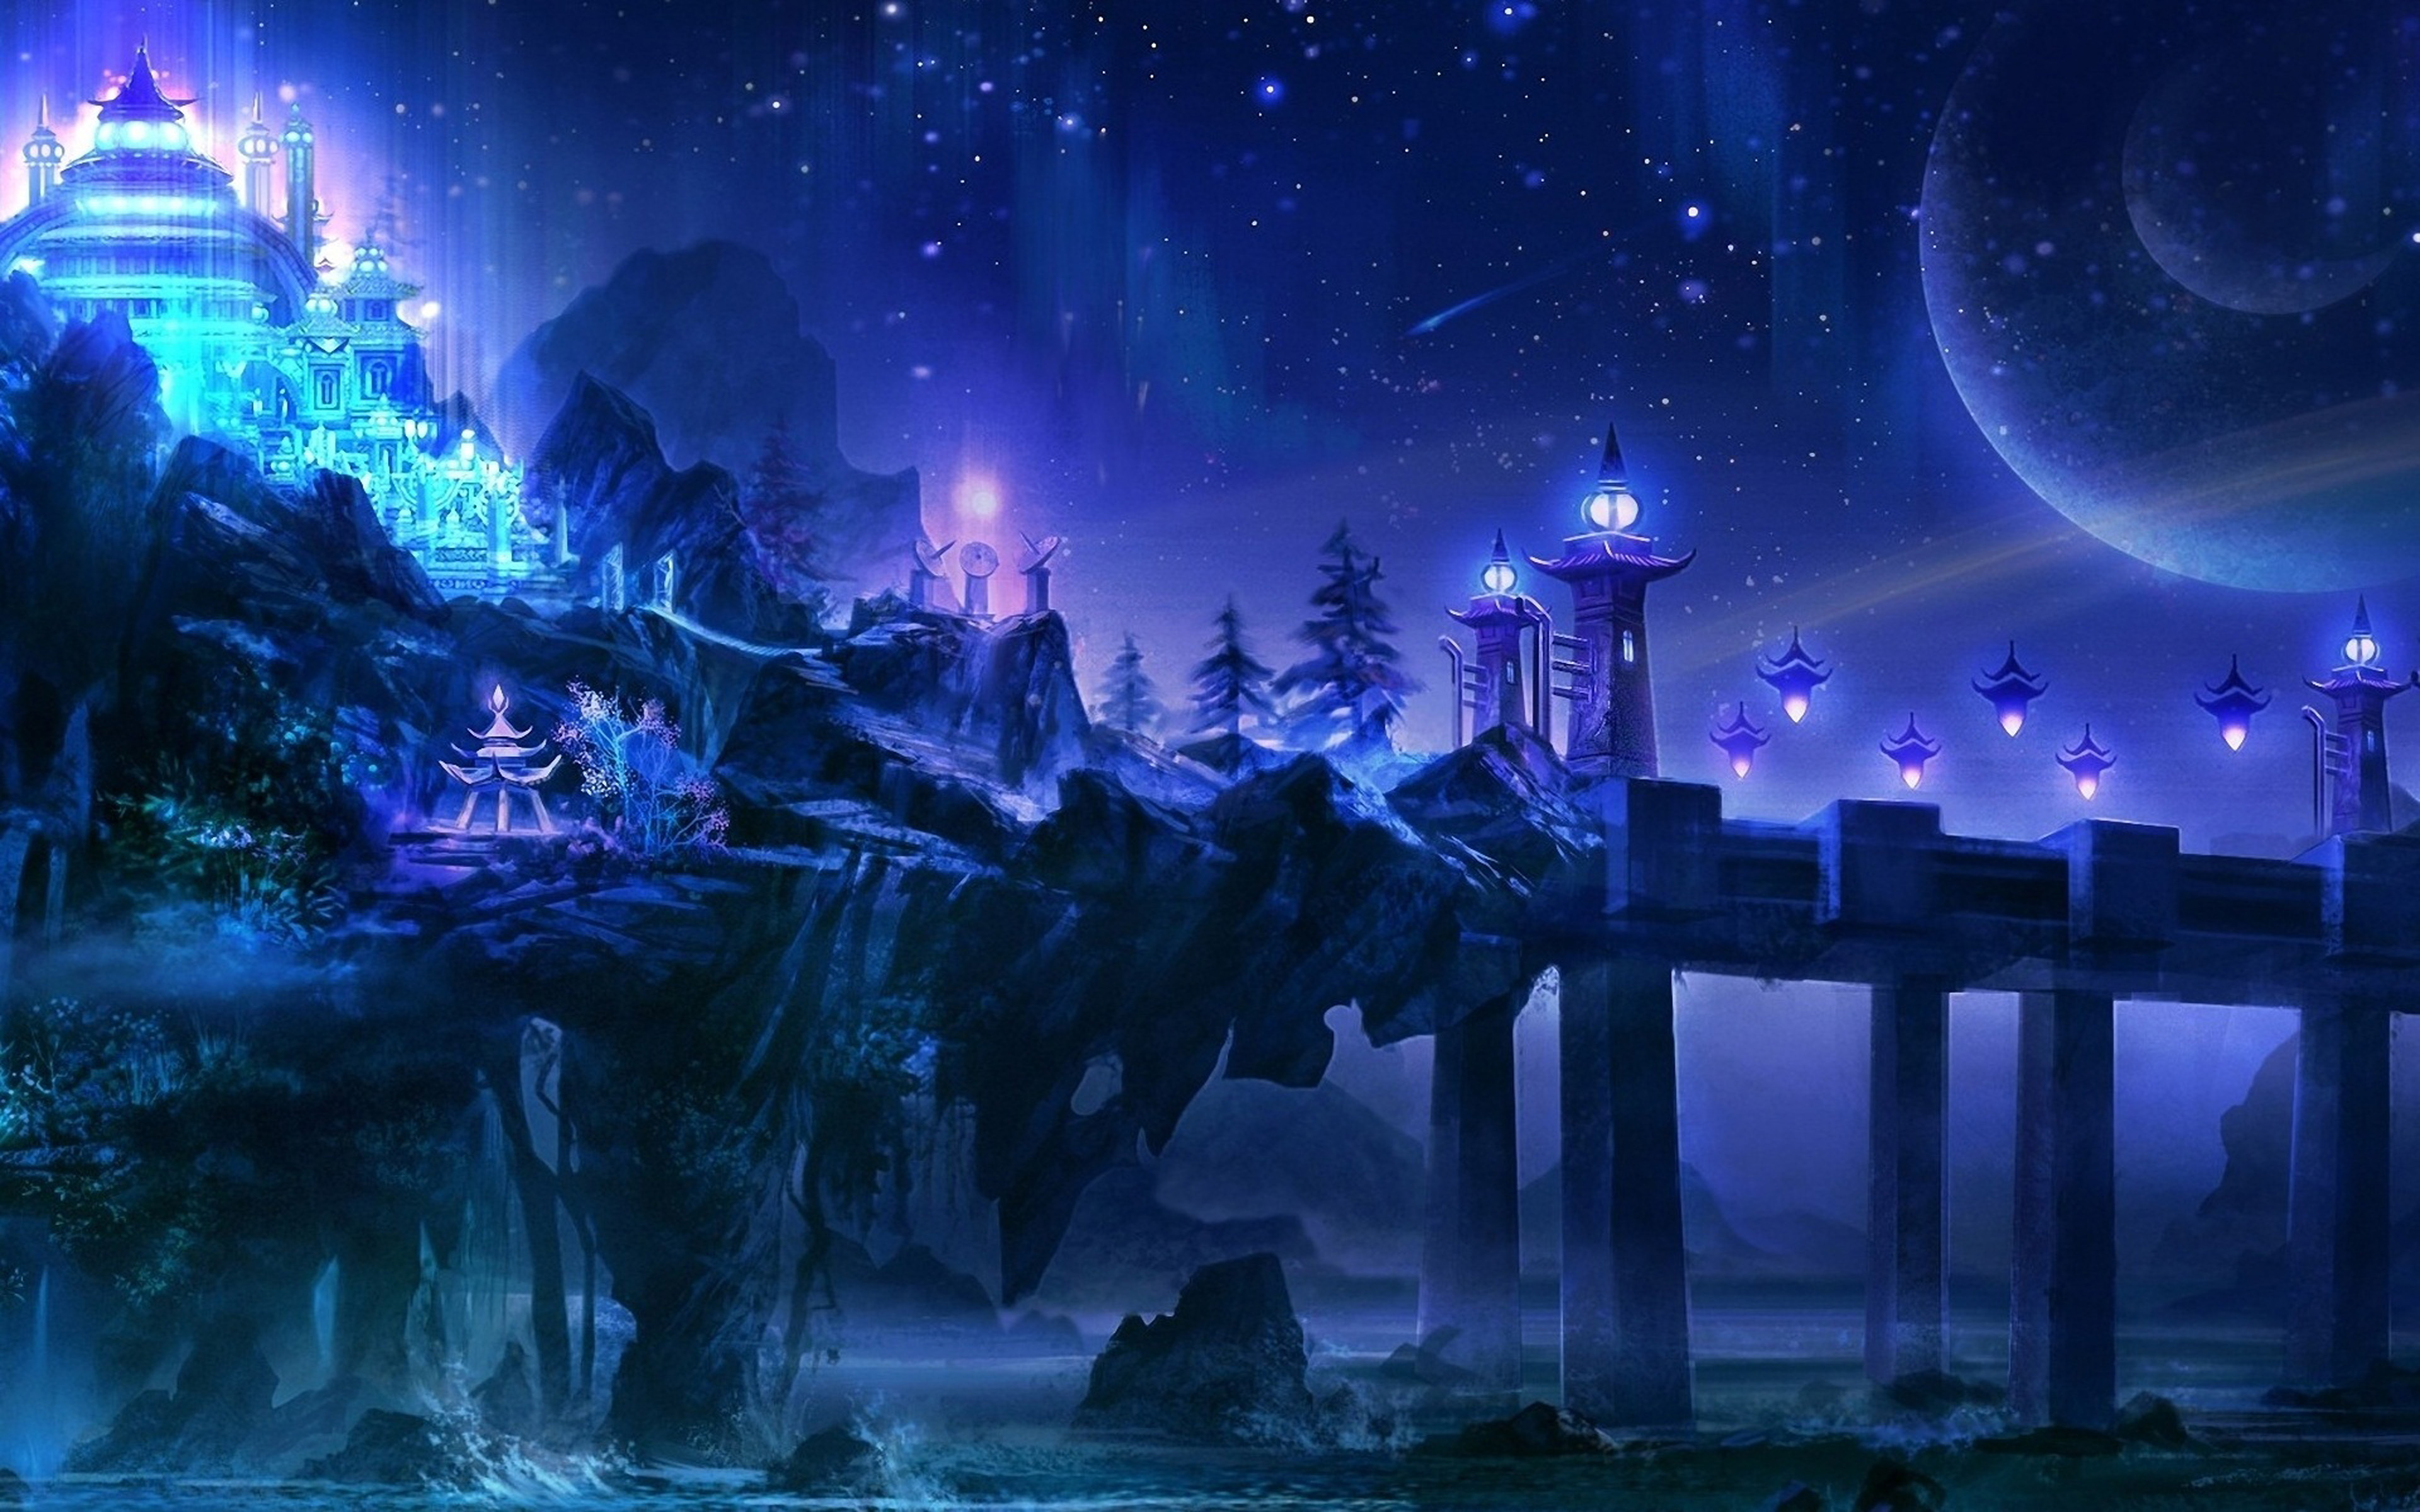 View In The Future Fantasy City Art Pictures Night Temple Lights Bridge  Rock Stones 4k Ultra Hd Wallpaper For Desktop Laptop Tablet Mobile Phones  And Tv 3840x2400 : 